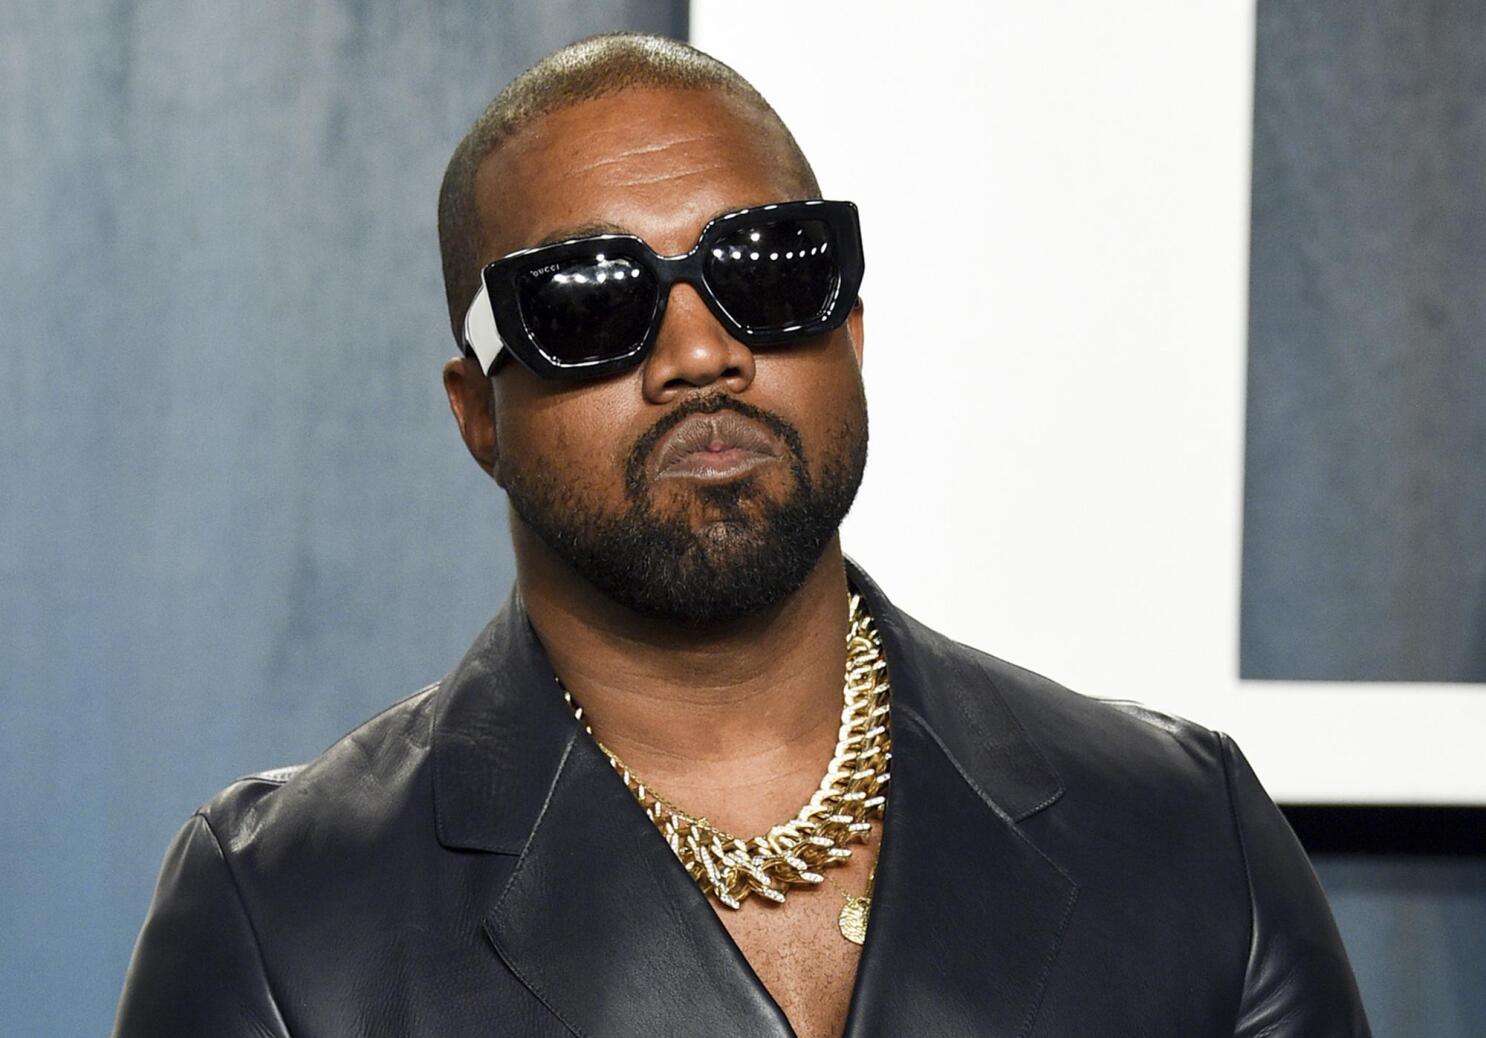 What's There Left to Say About Kanye West?